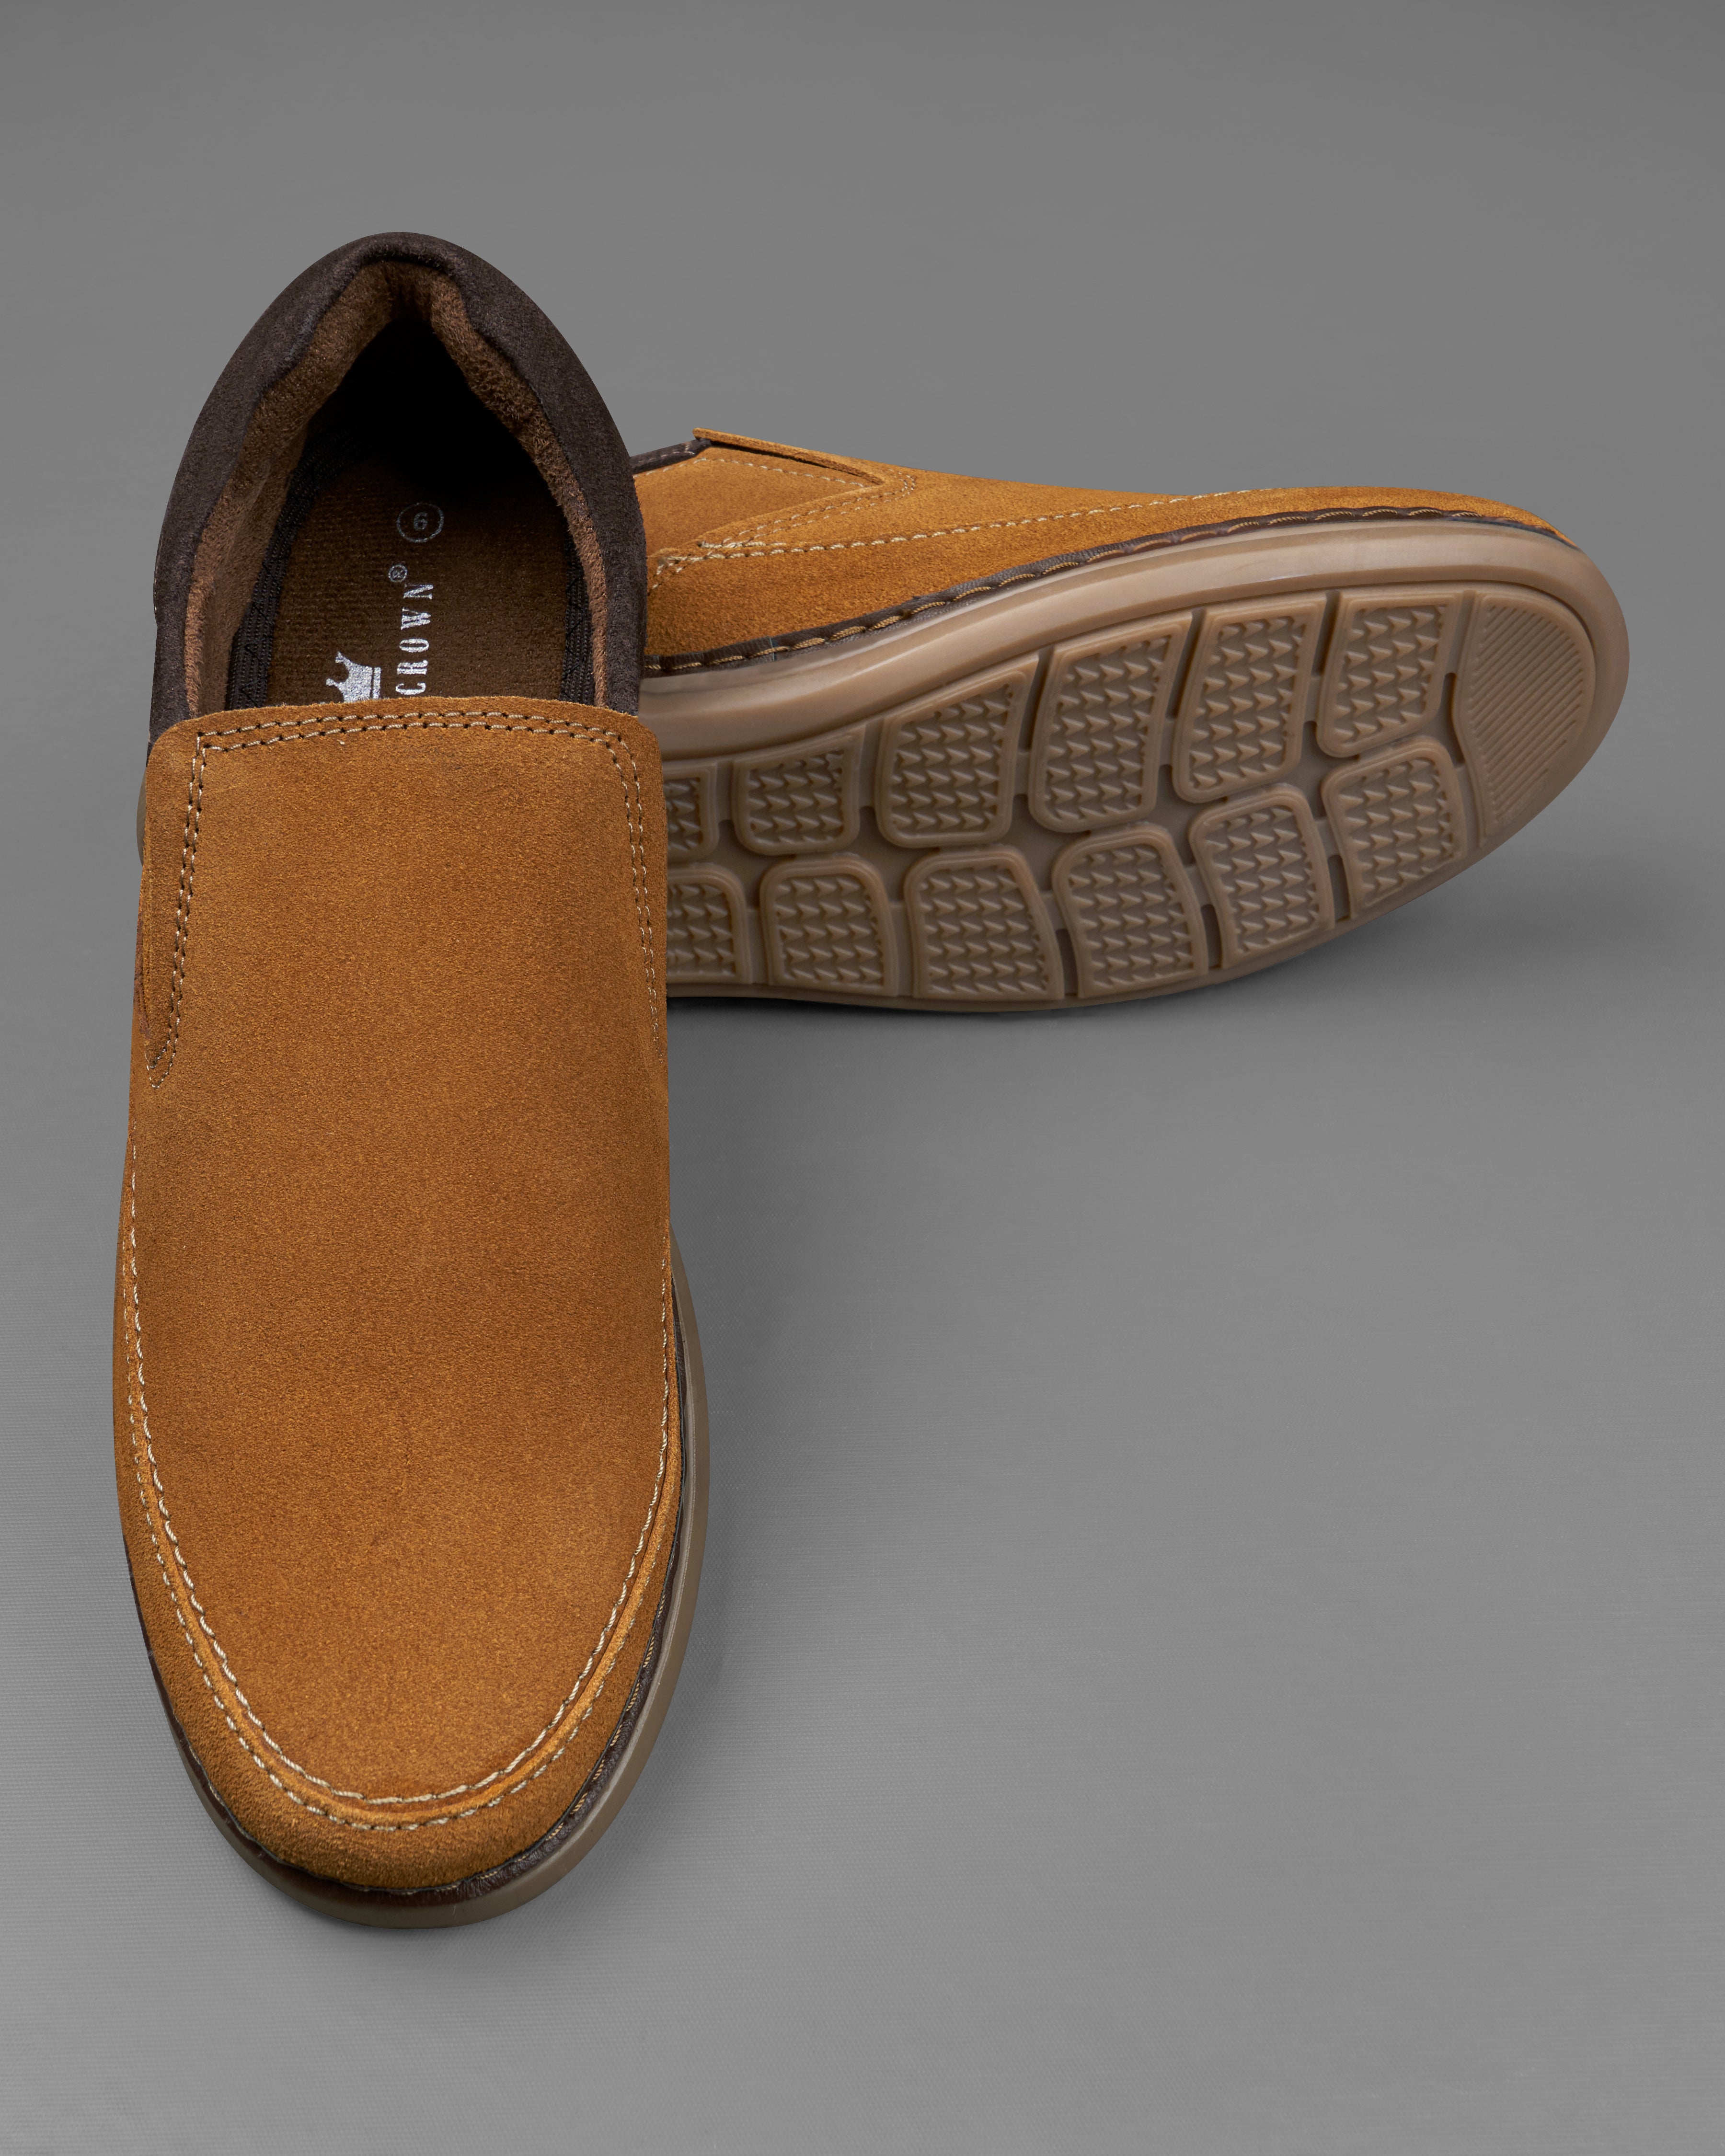 Brown Slip On Suede leather Shoes FT076-6, FT076-7, FT076-8, FT076-9, FT076-10, FT076-11